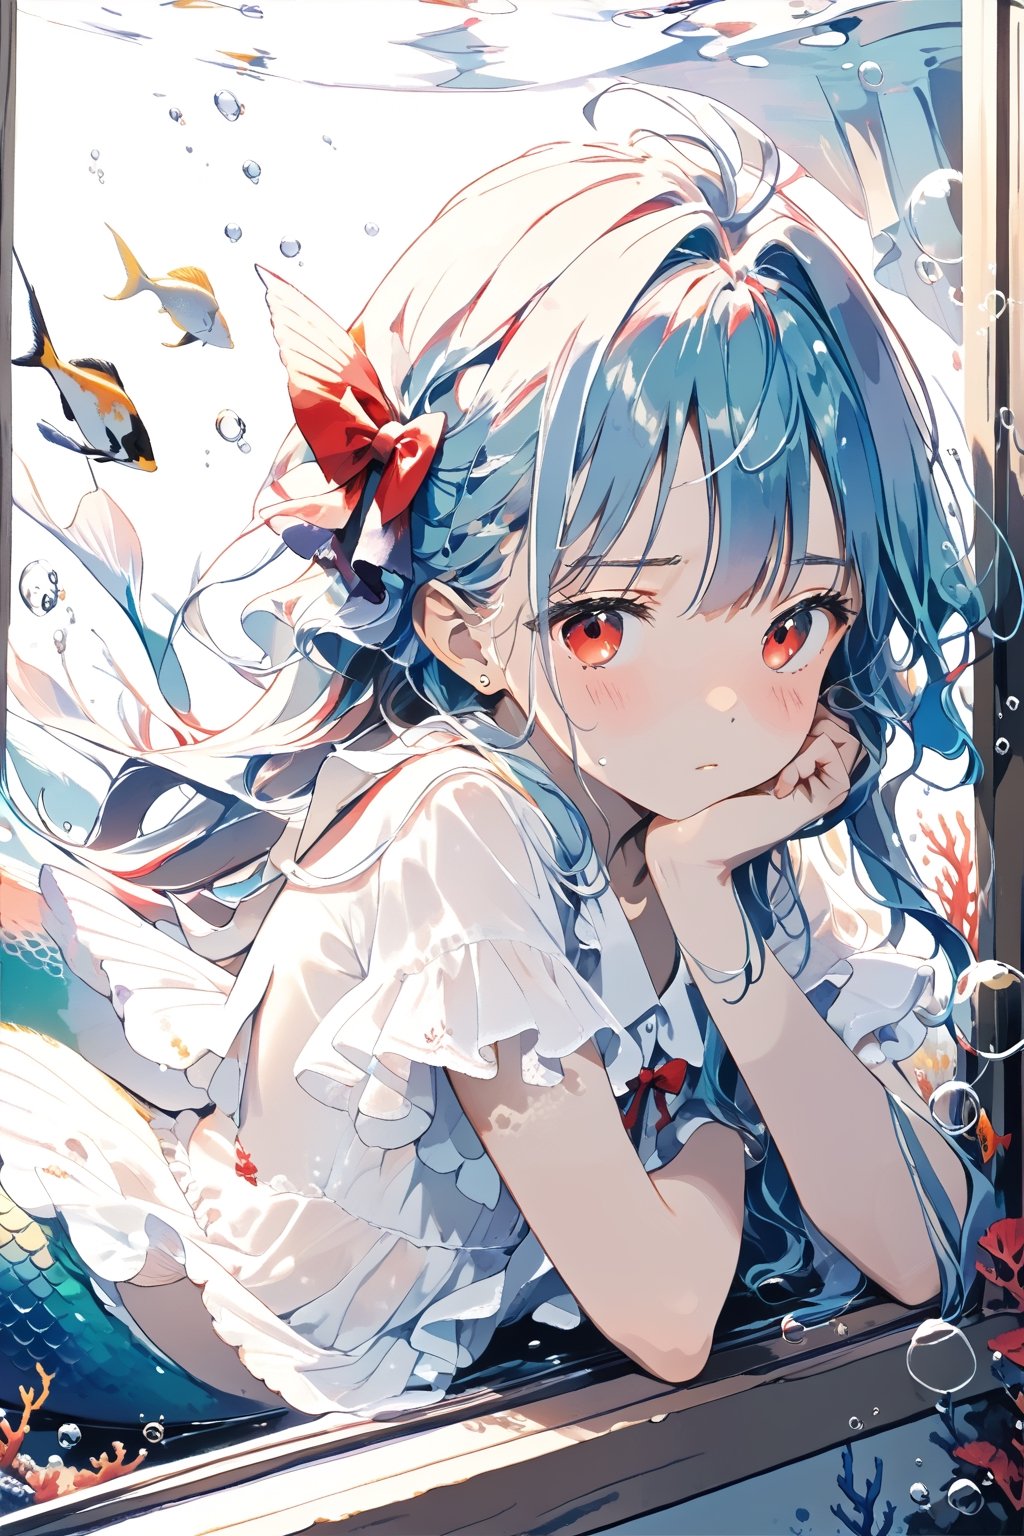 //quality, (masterpiece:1.4), (detailed), ((,best quality,)),//1girl,(mermaid:1.4),(loli:1.3), child,cute,//,(blue_hair:1.3),ahoge,floating_hair,detailed_eyes,(red eyes:1.2),//,(bows,frilled_dress),pajamas,//,blush,furrowed brow,sad,gloom,:(,//,(hands resting on window frame:1.2),head rest,//,window, underwater,(fish:1.2), bubbles,close_up portrait,(from outside window :1.4)